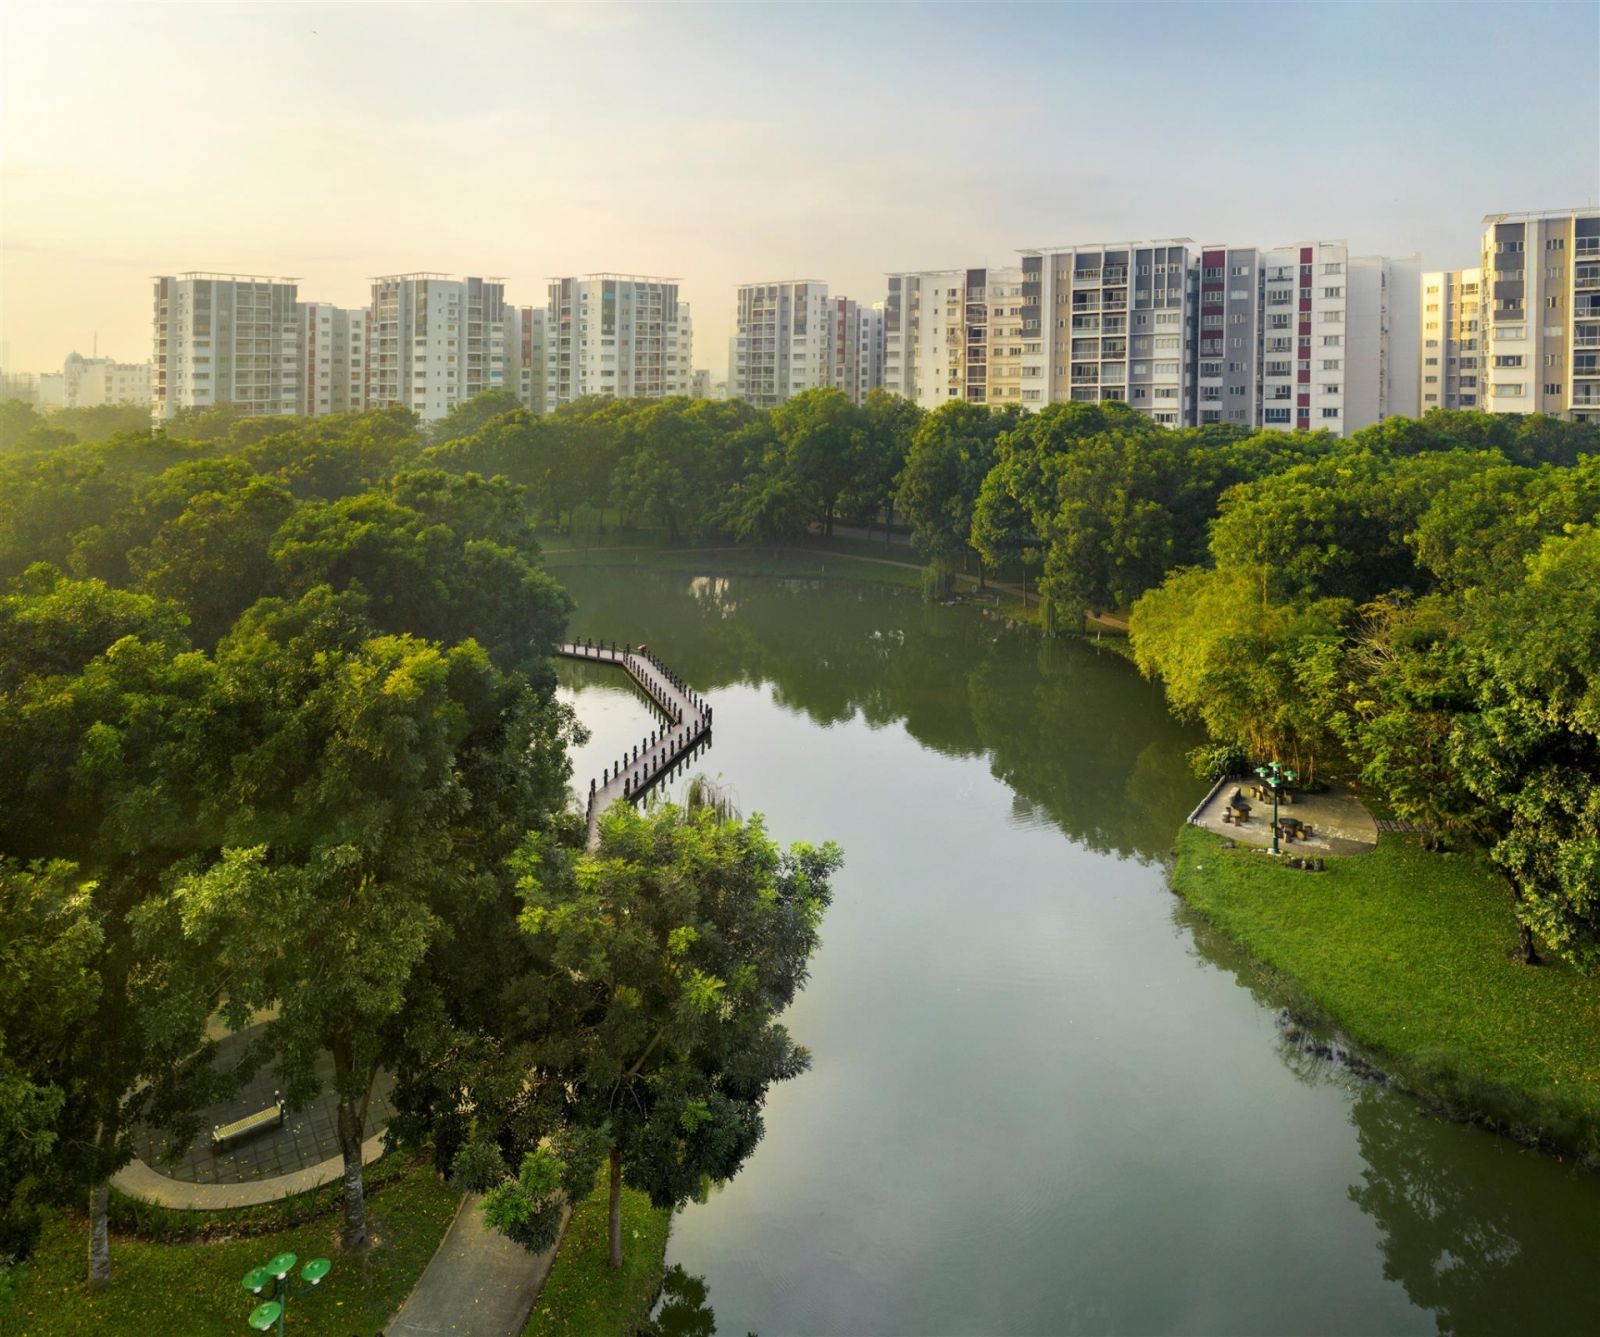 Celadon City is built on a total area of 82ha with more than 16ha dedicated to lush parks.